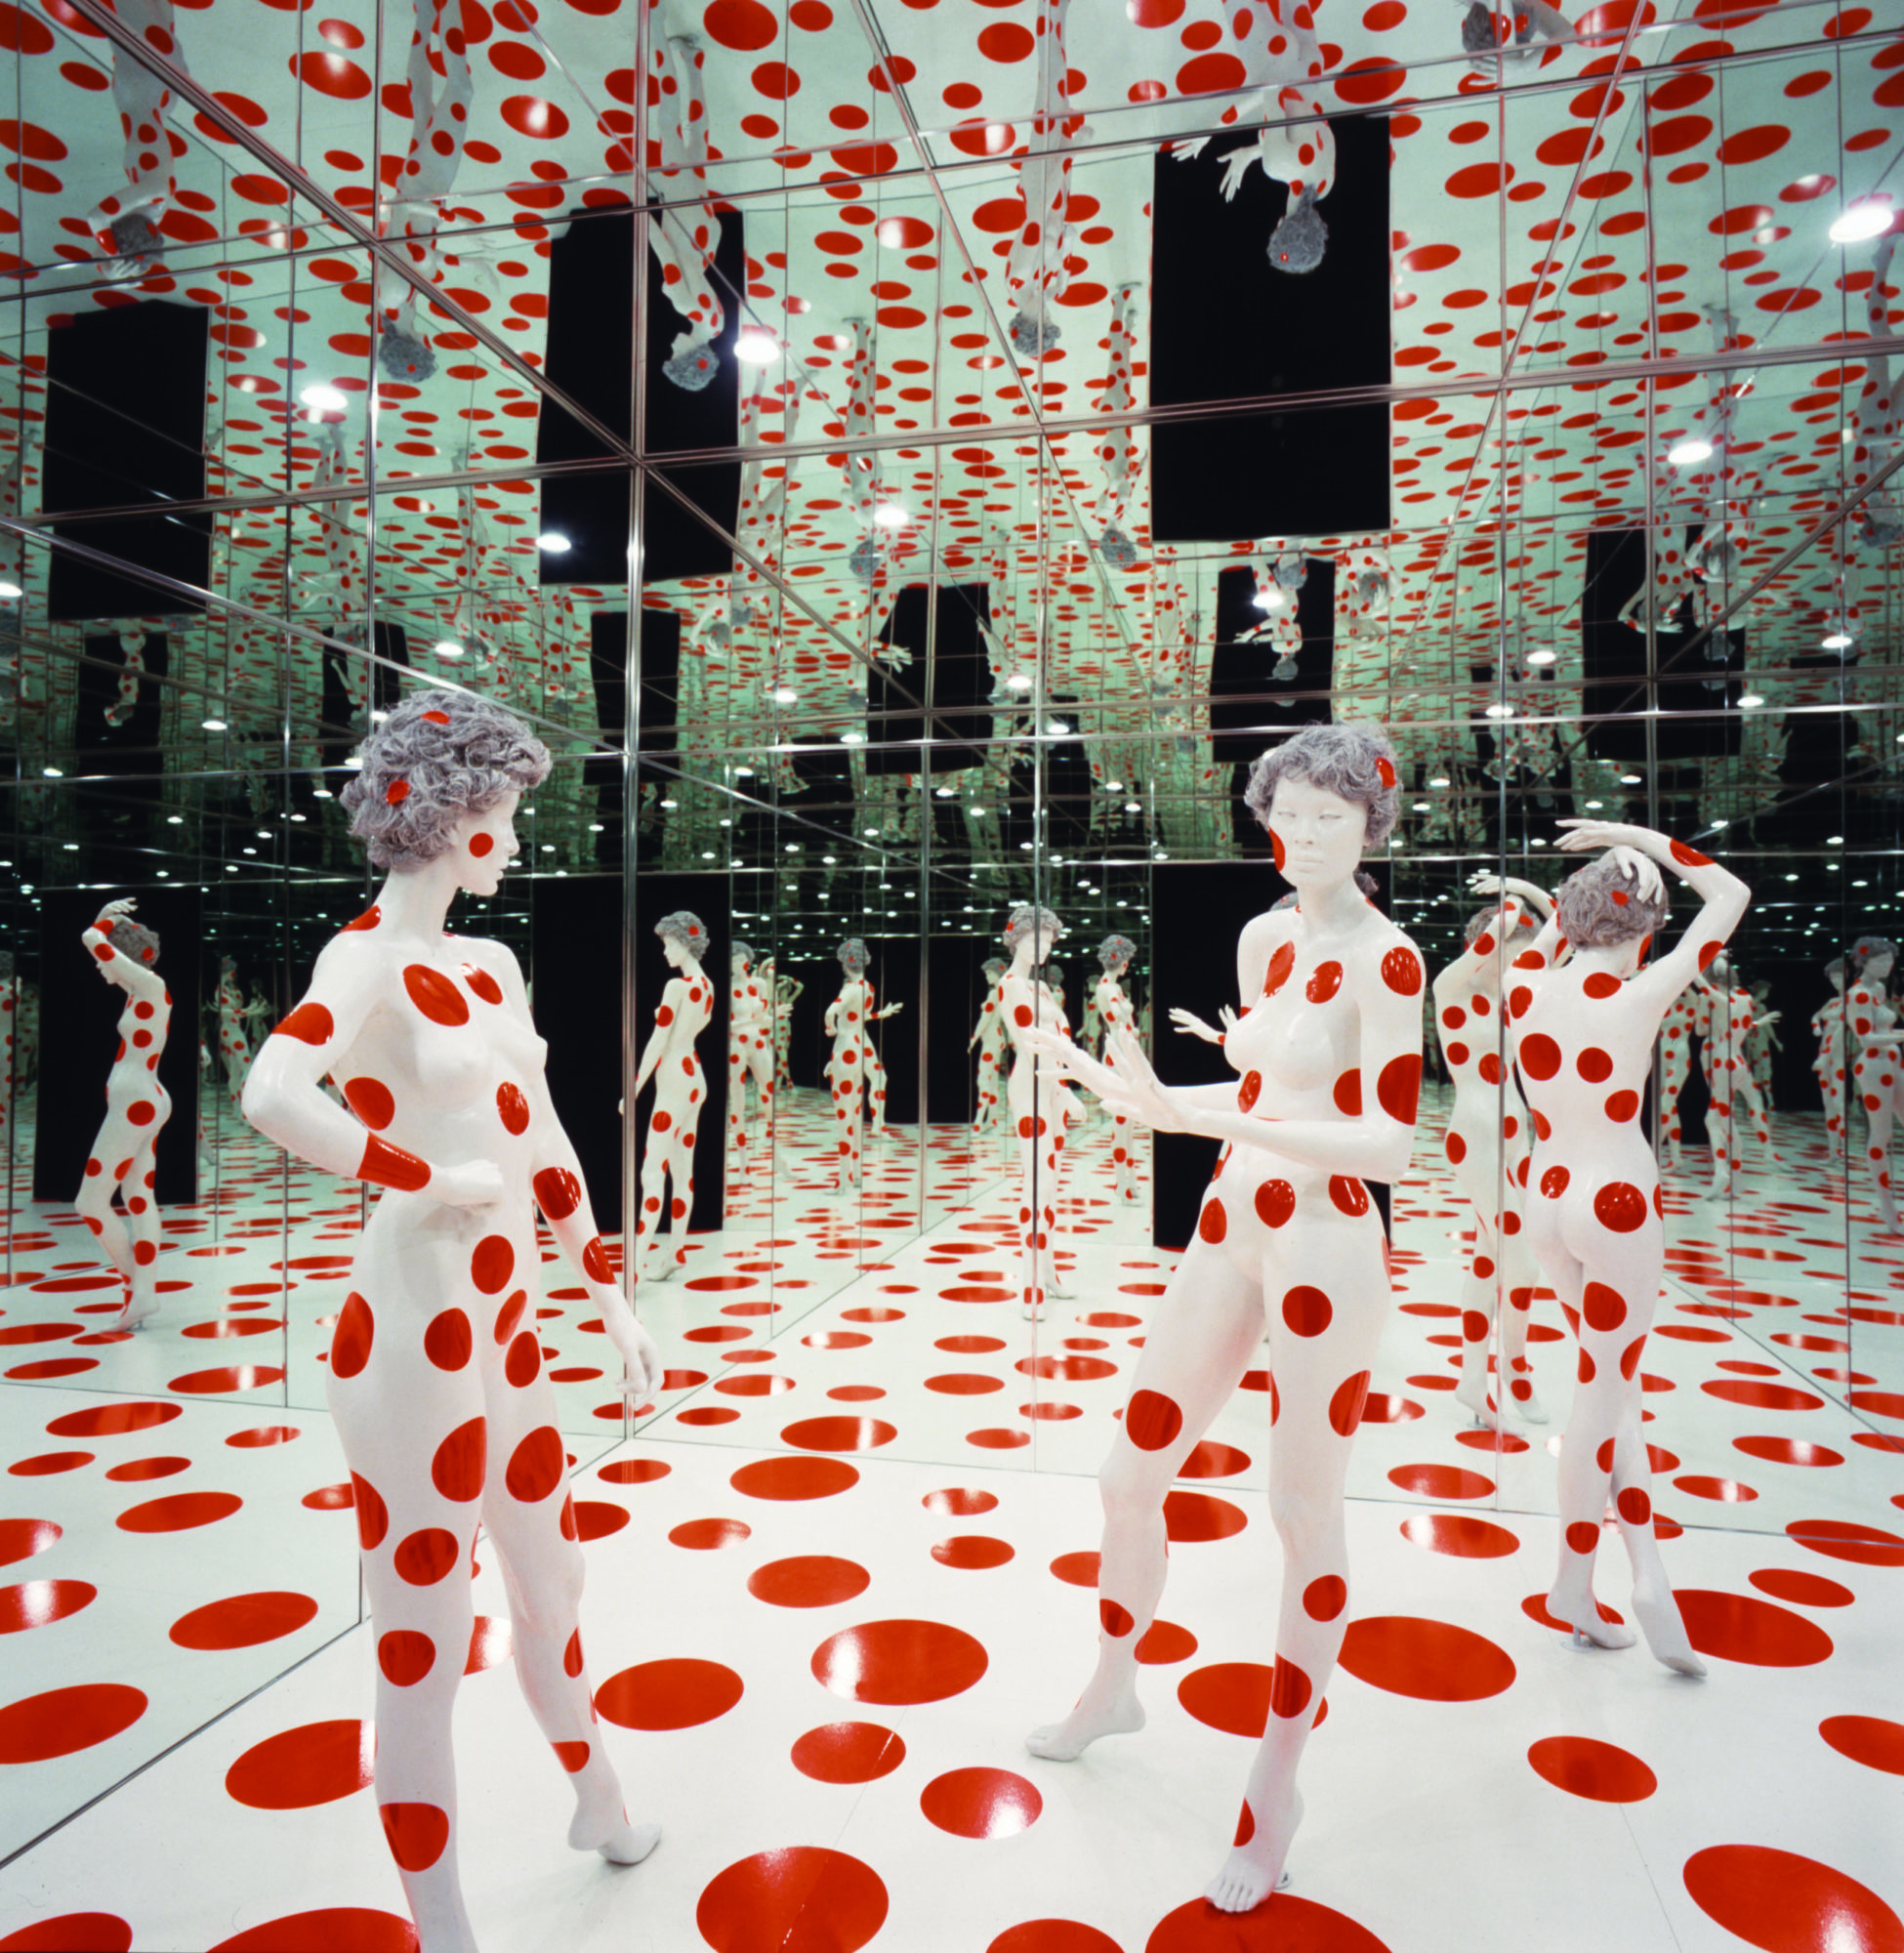 mannequins covered in red dots at the mattress factory museum in pittsburgh pennsylvania